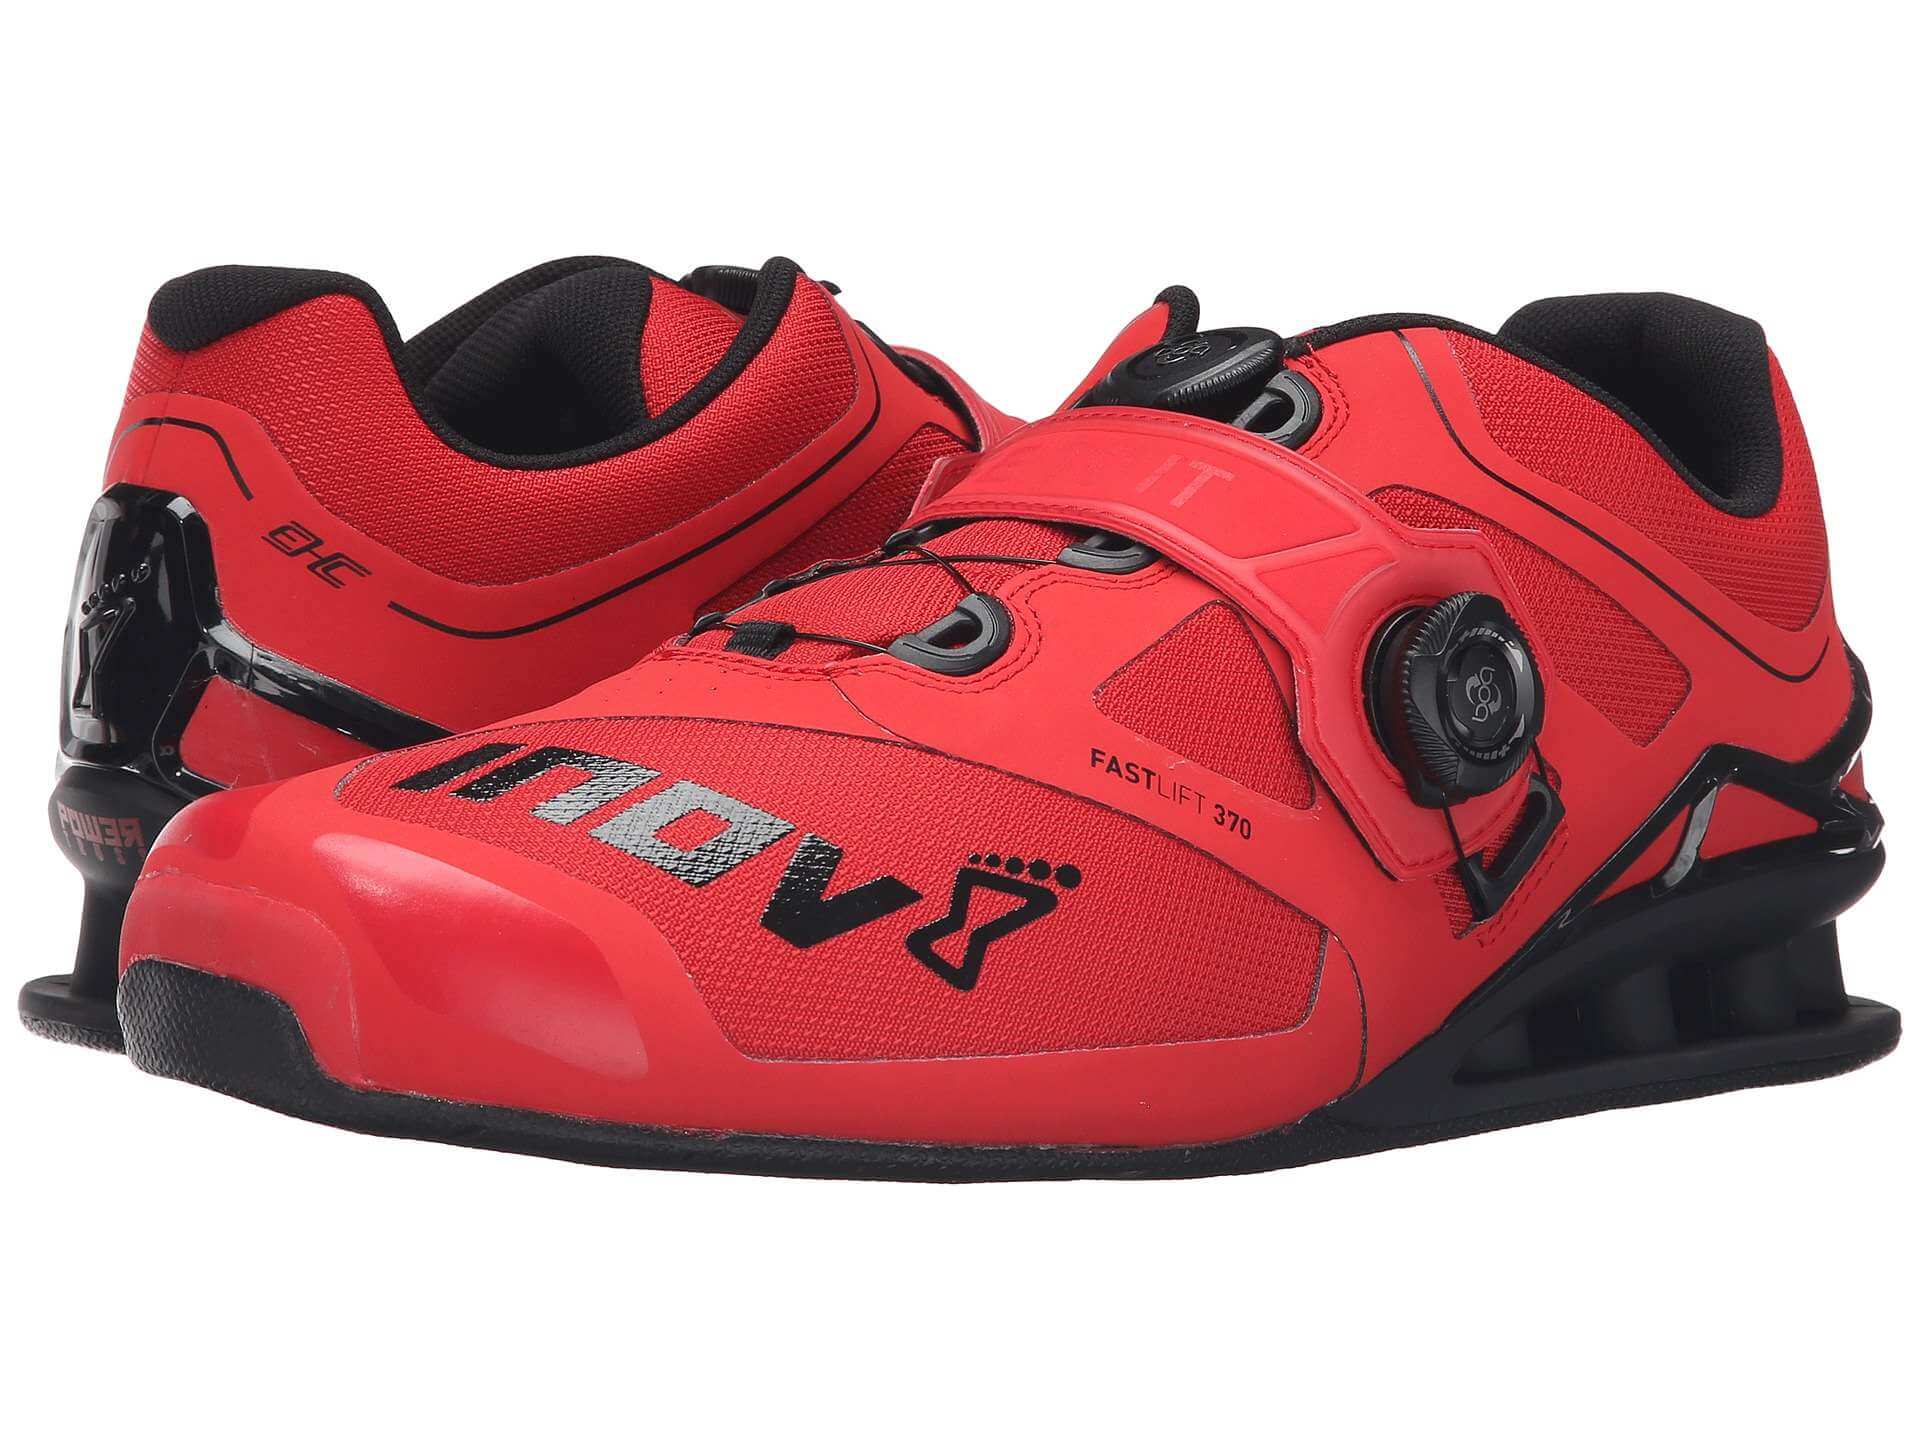 Inov-8 Fastlift 370 Review - Weight 